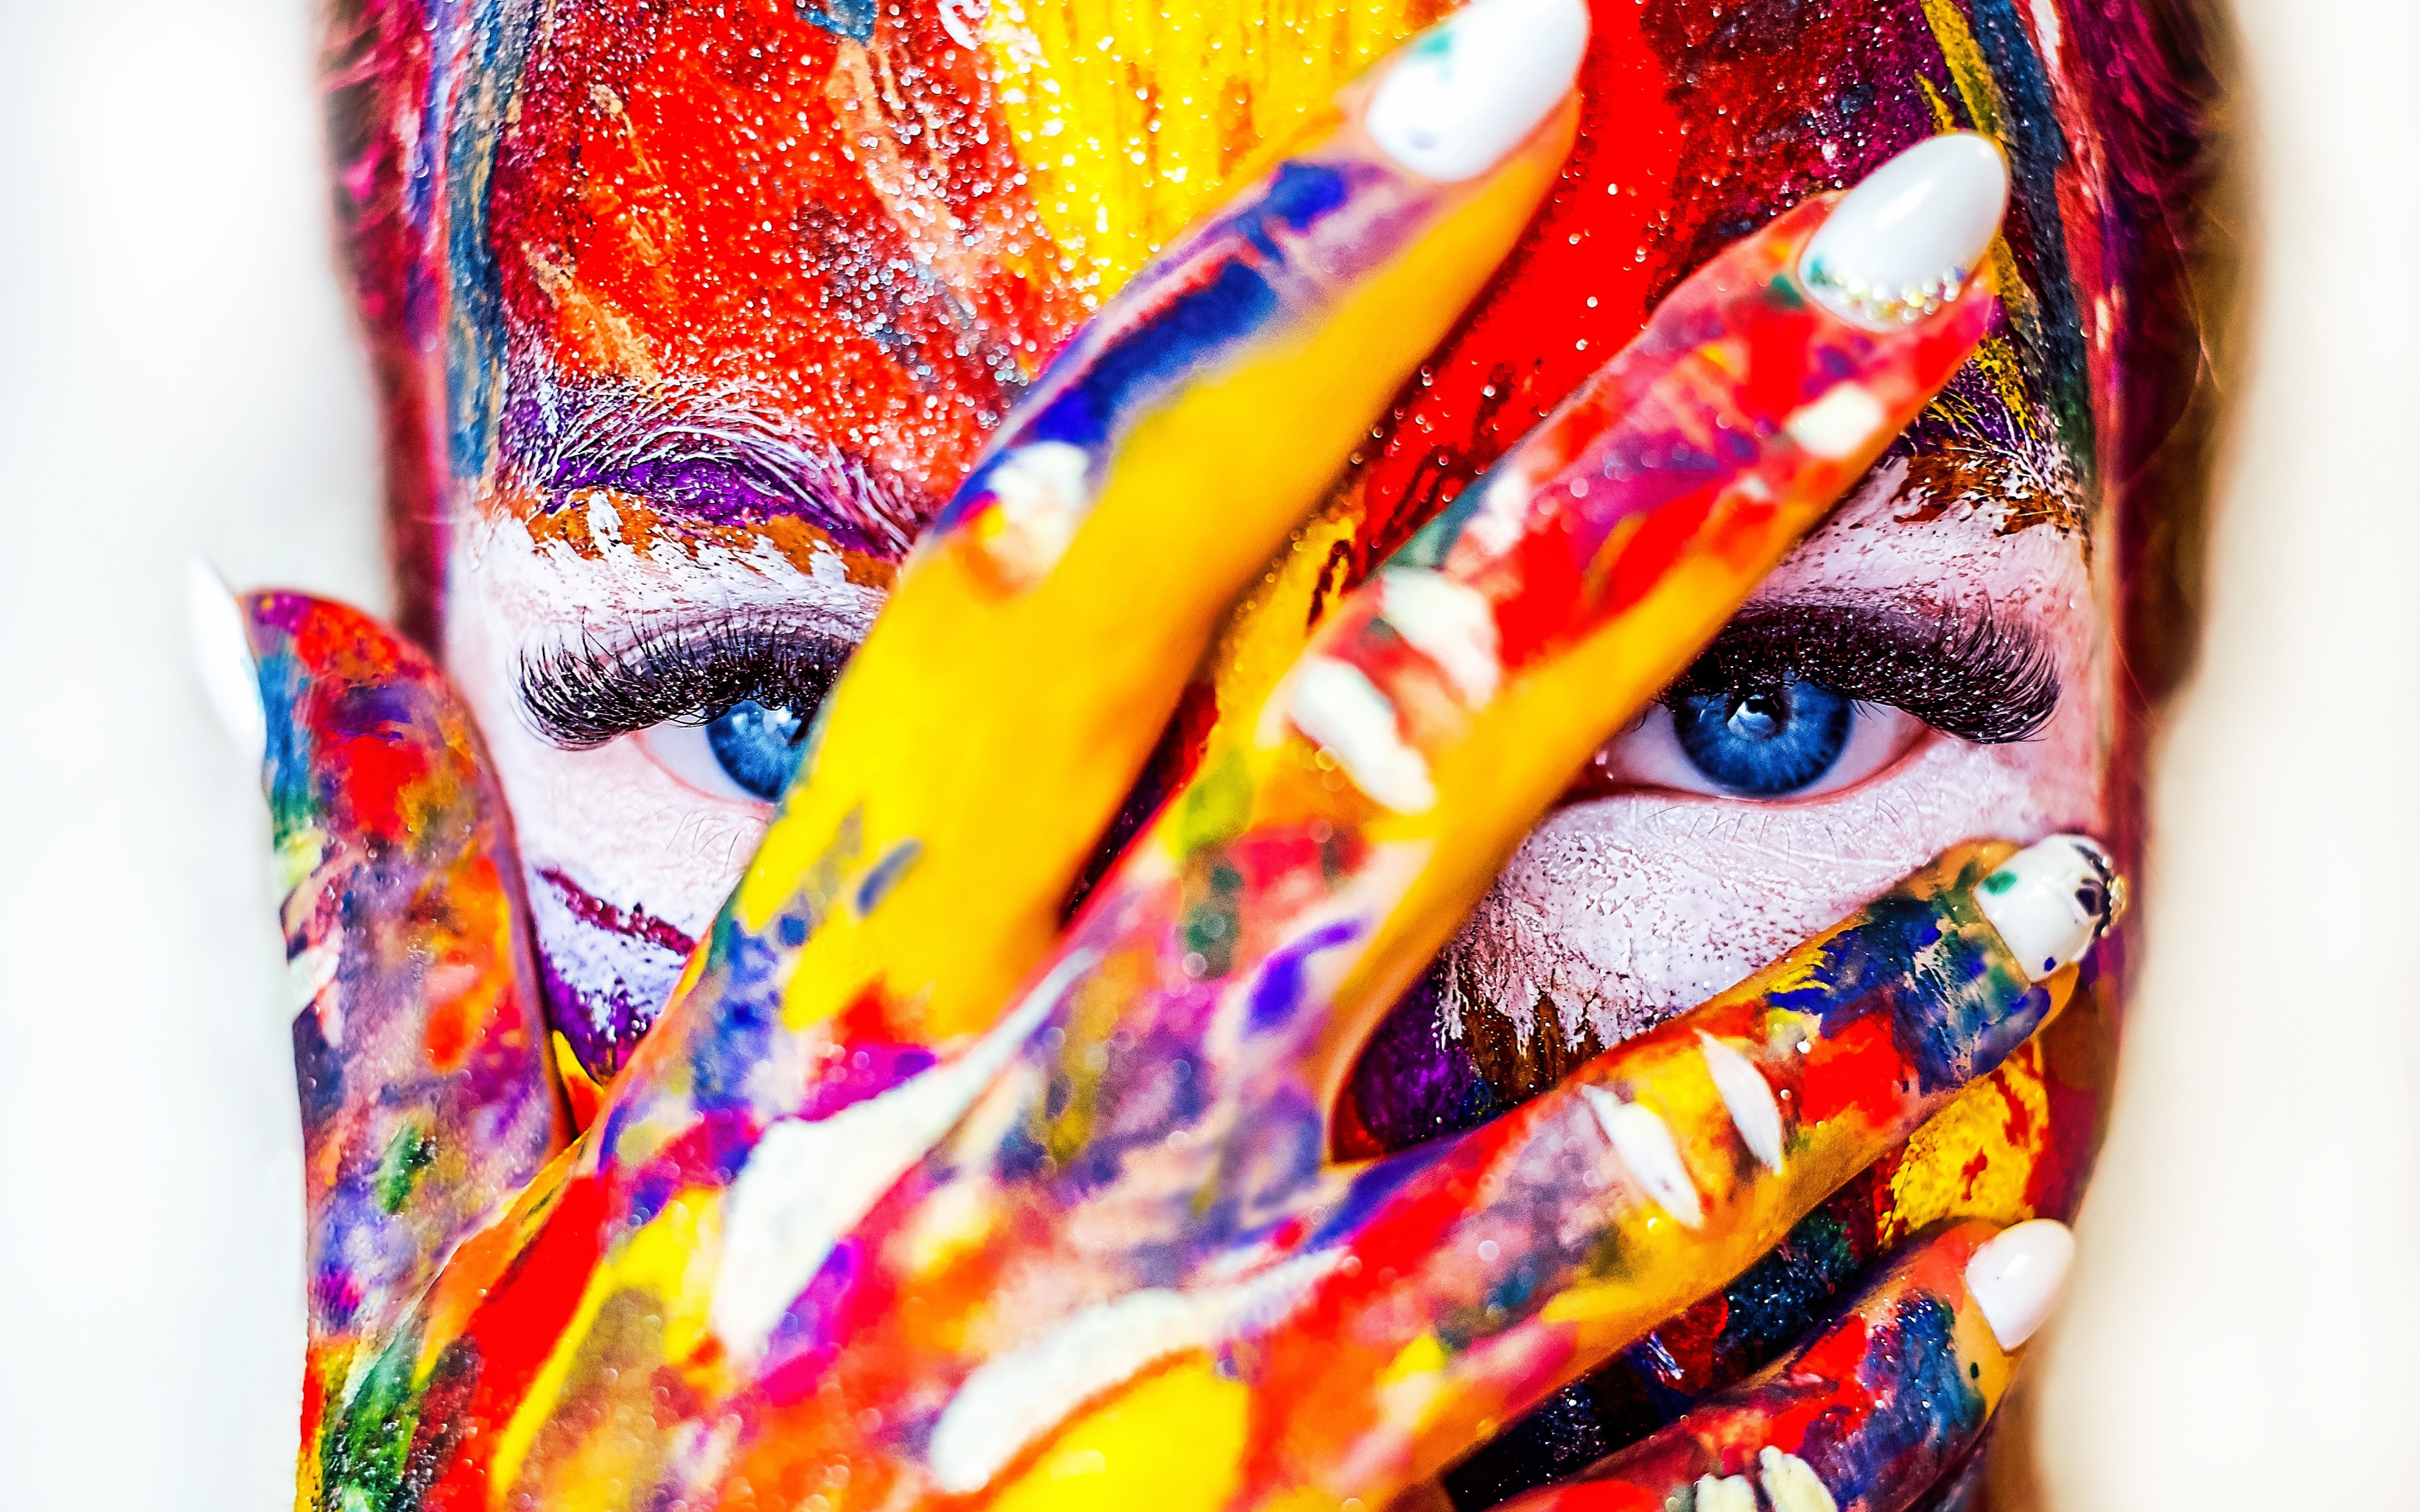 Paint on face and hand, colorful, close up, 2880x1800 wallpaper